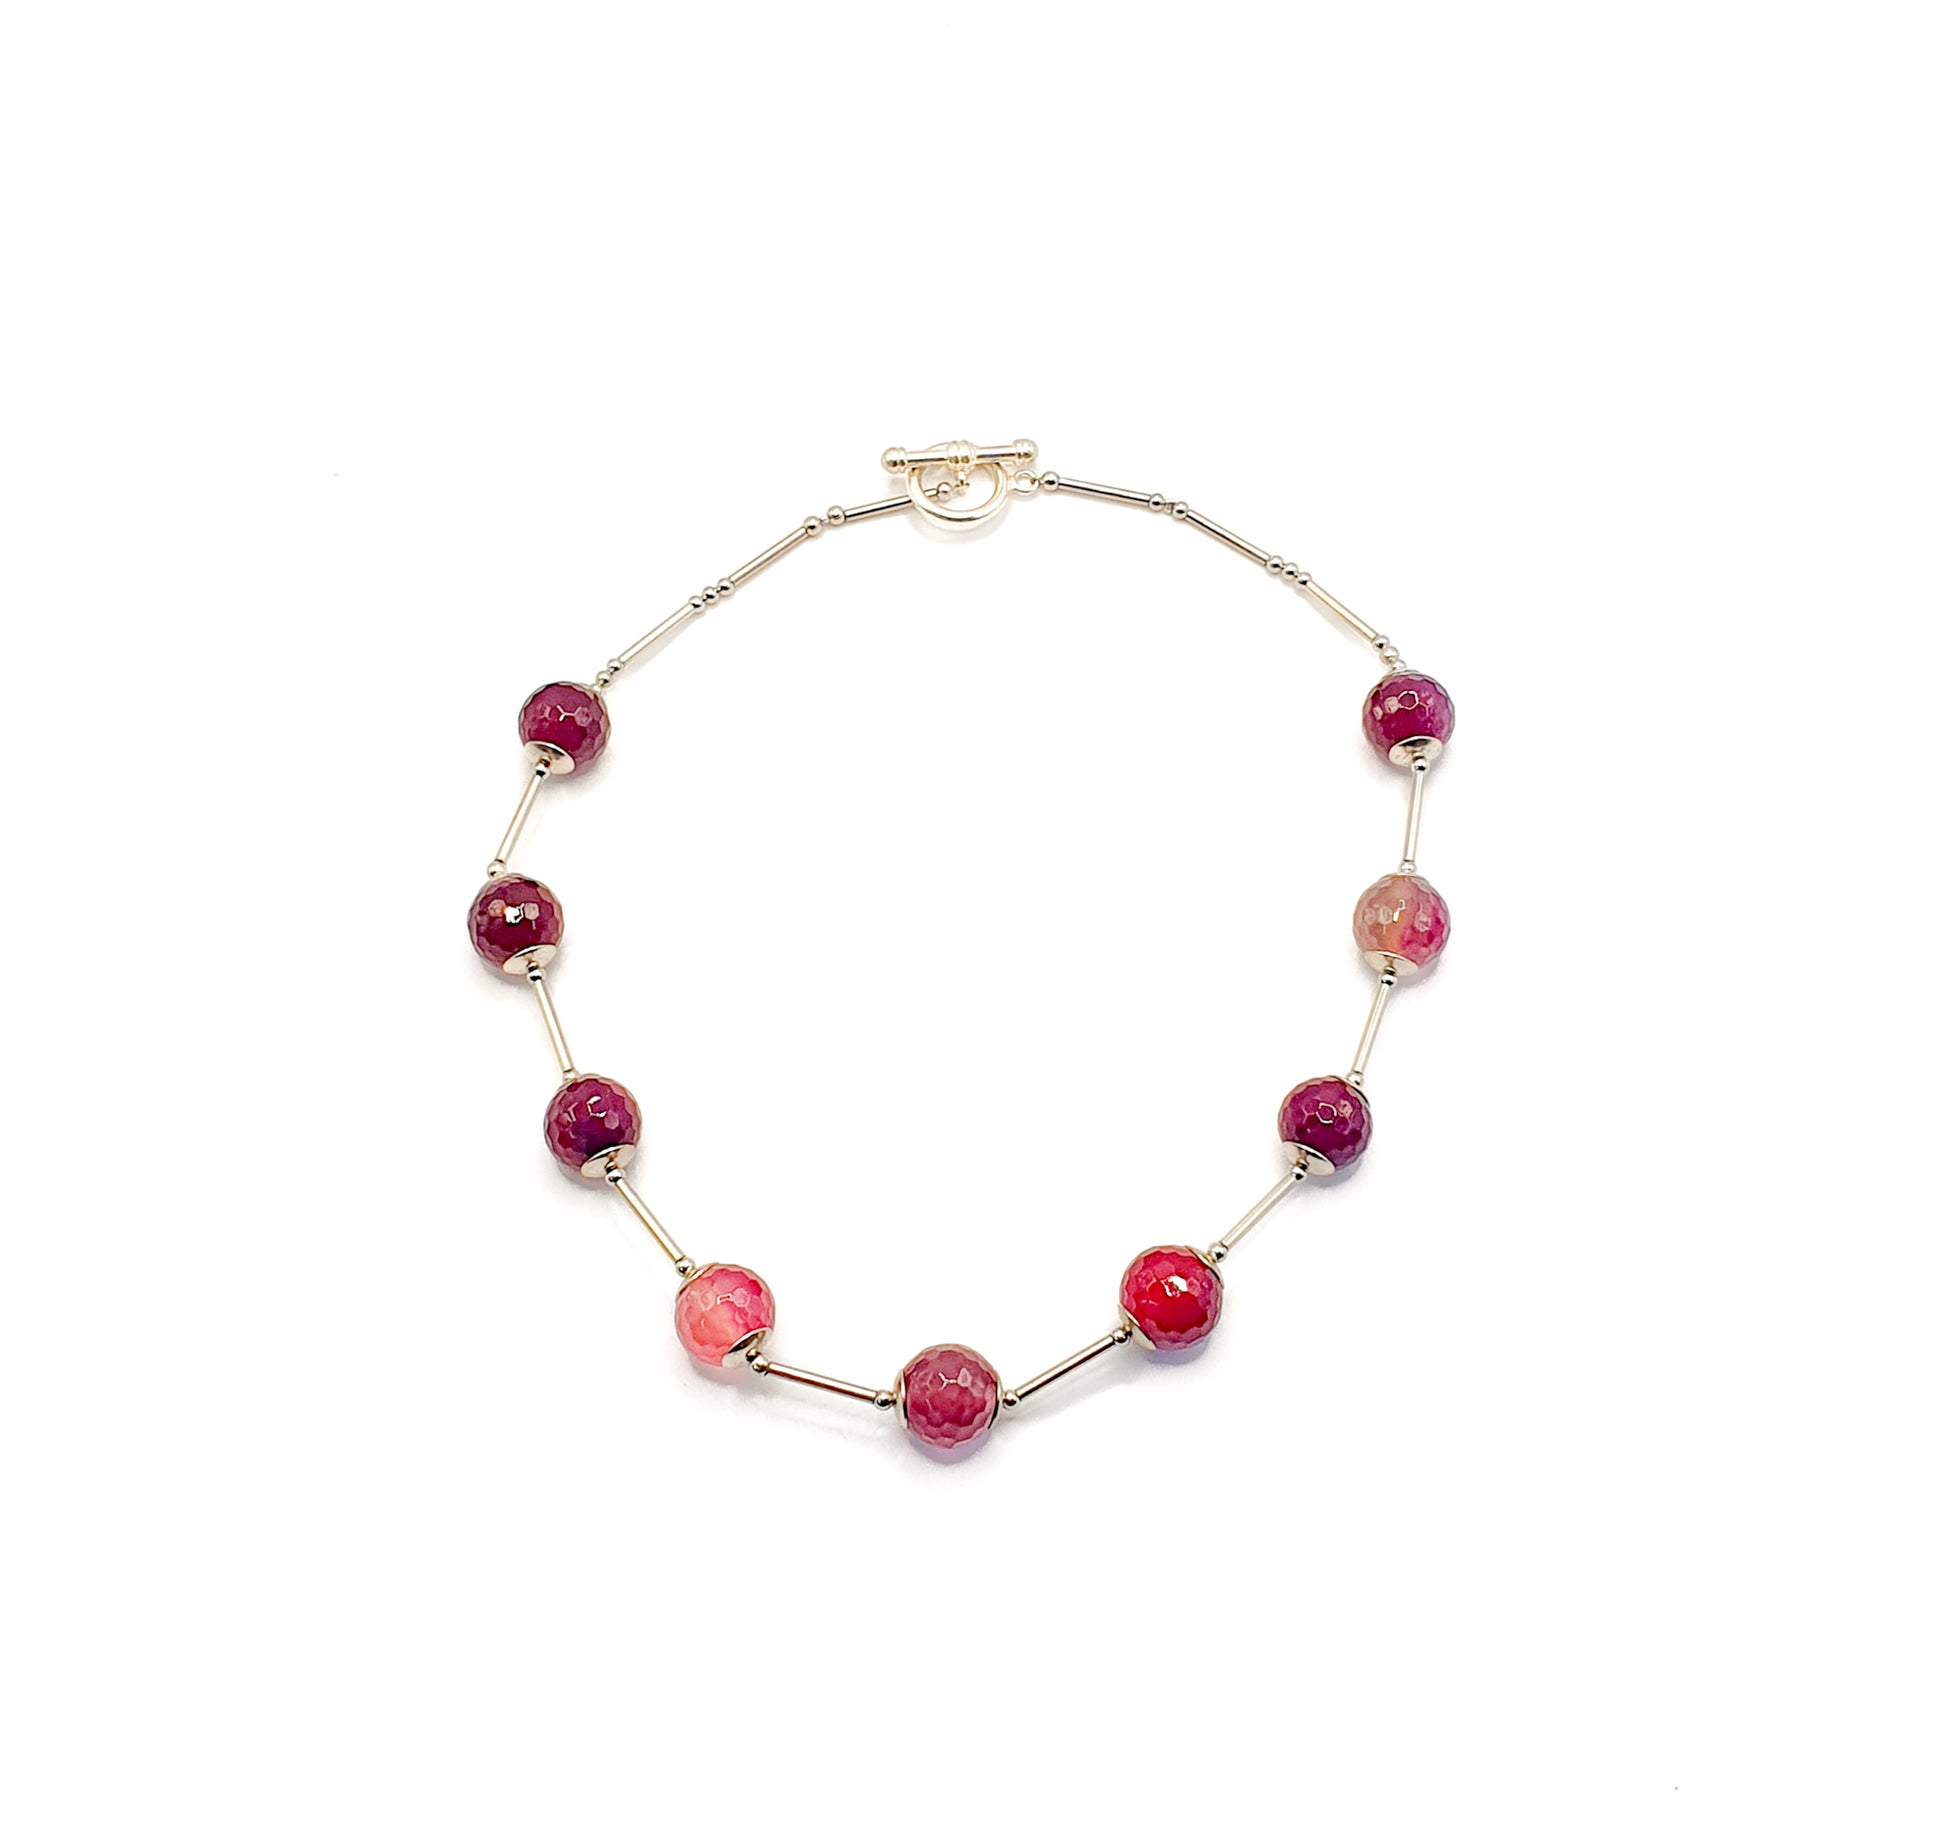 Orb style necklace in pink faceted agate